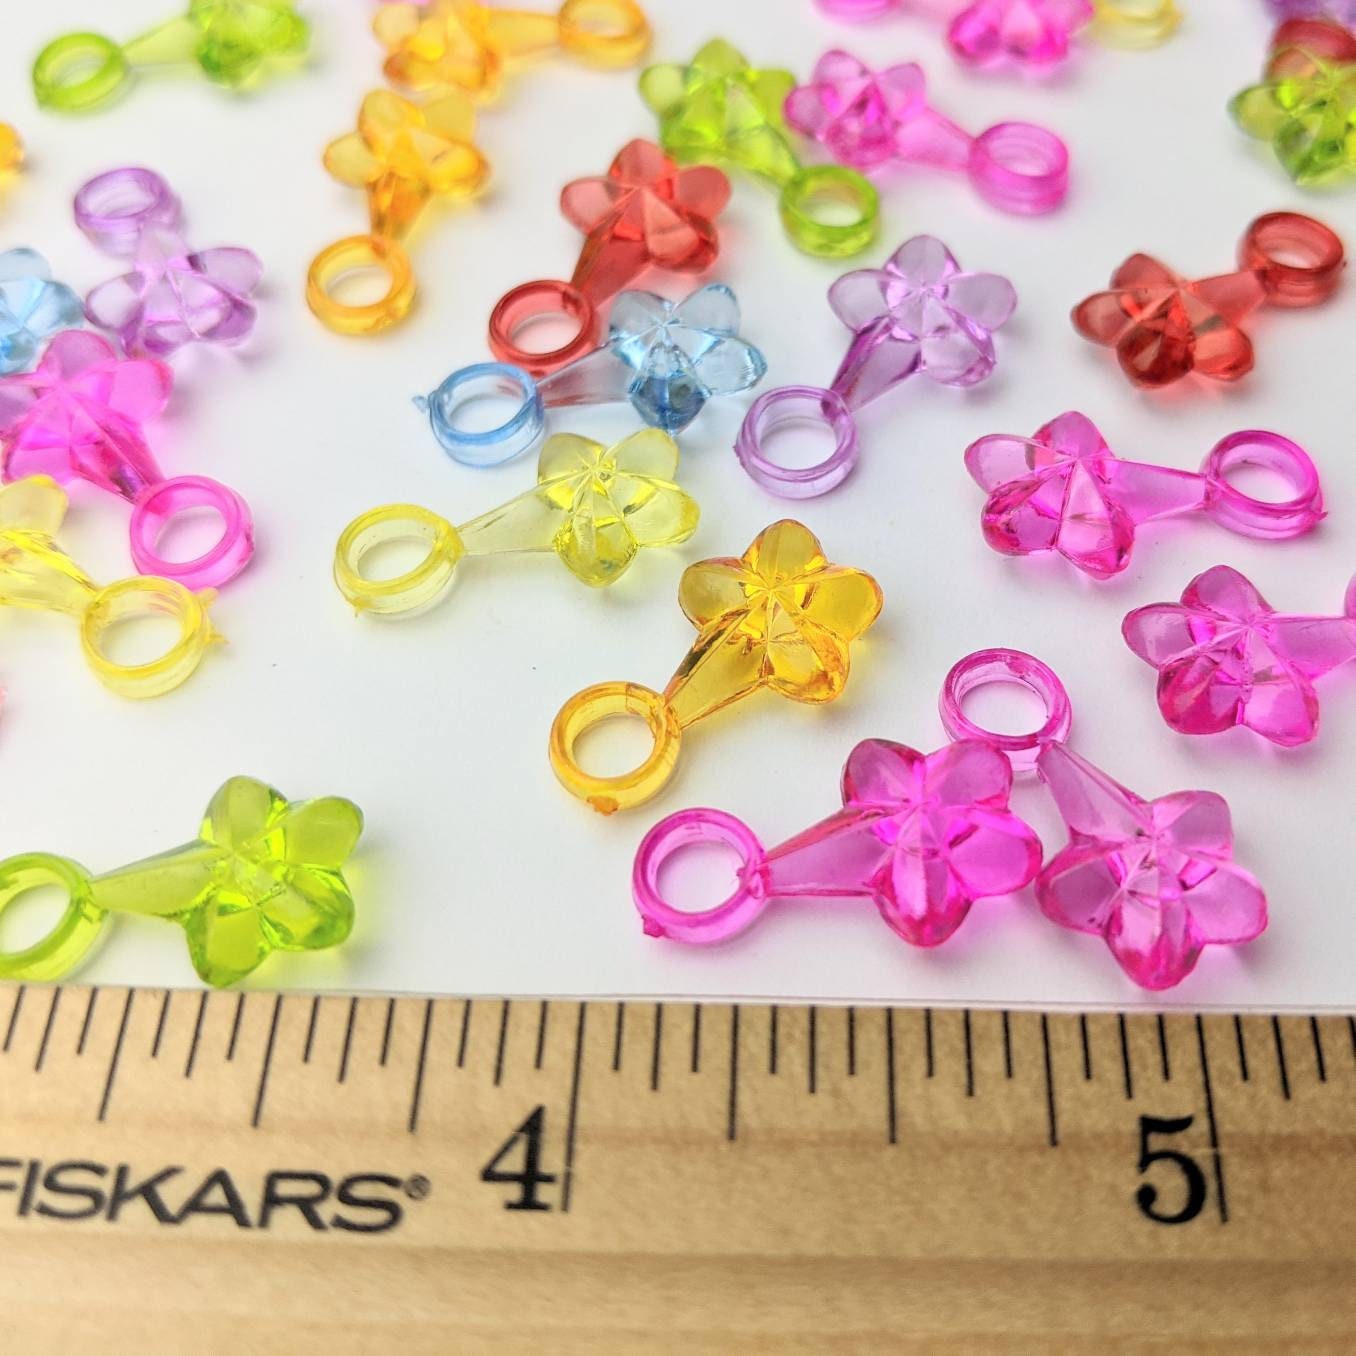 Plastic Rings 2 Inch Set of 100 Bird Toy Part, Sugar Glider Toy